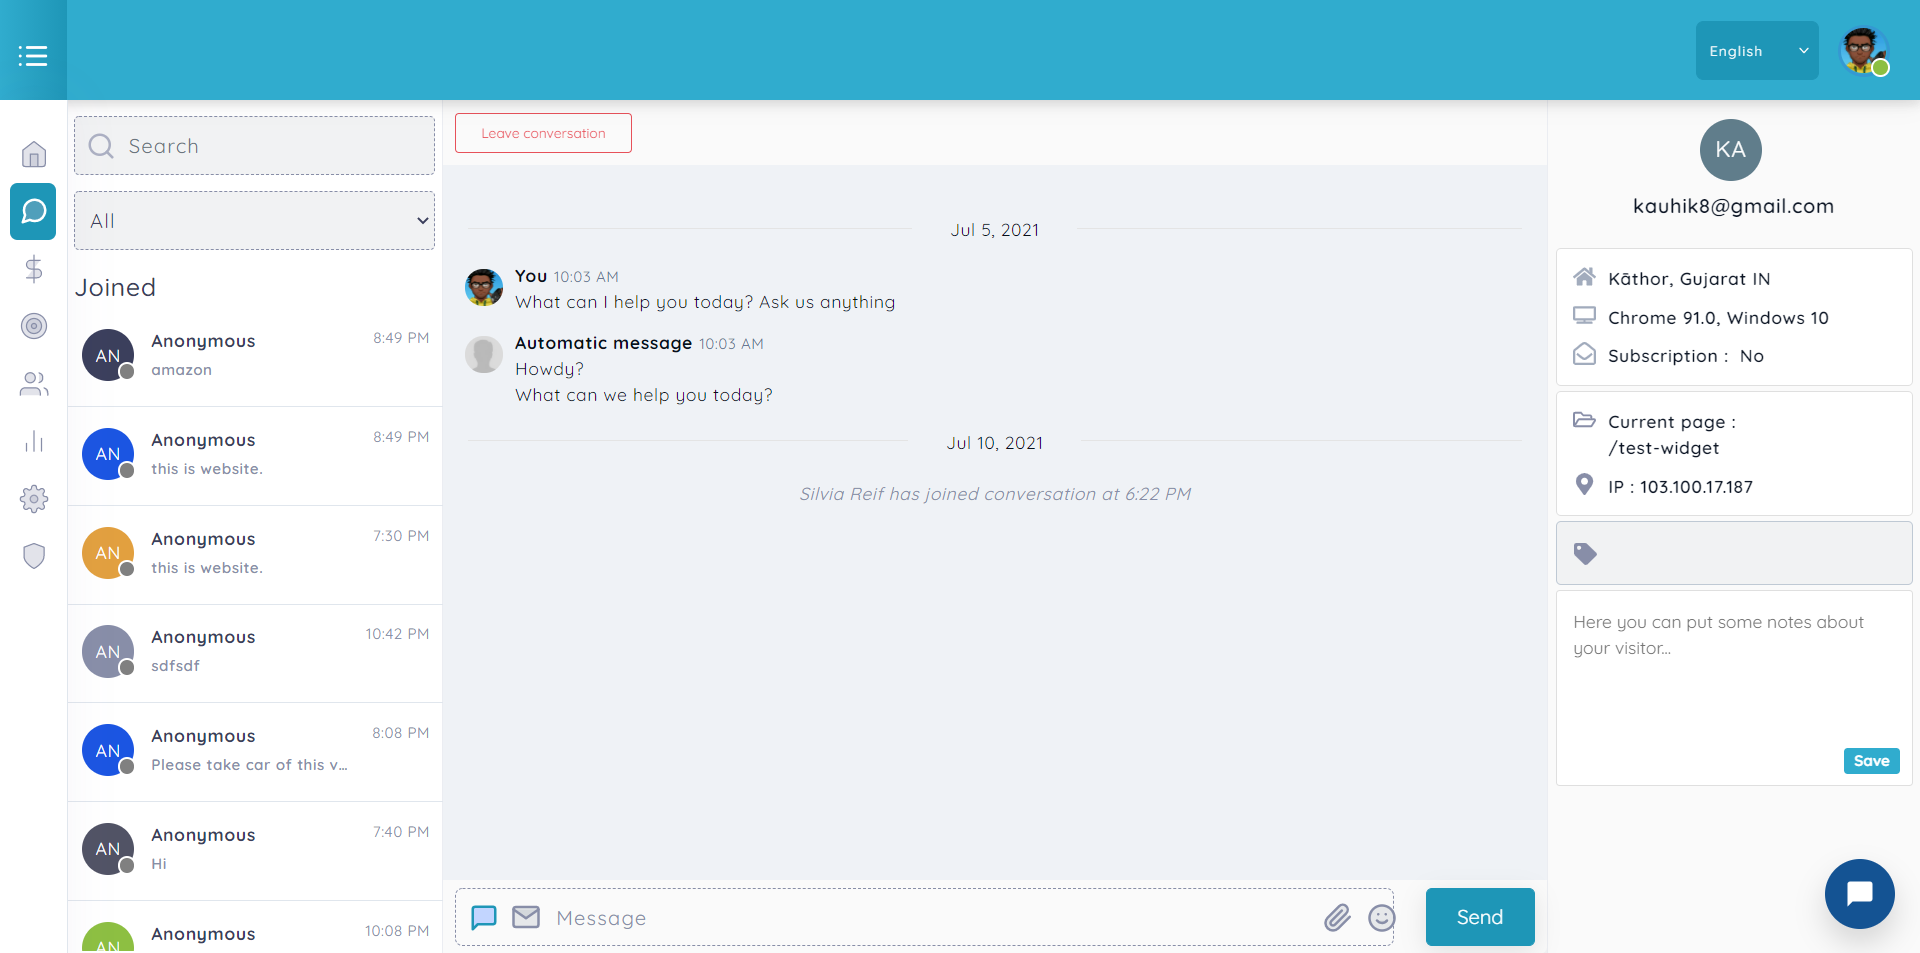 Stay on top of conversations and respond quickly with the live typing preview.